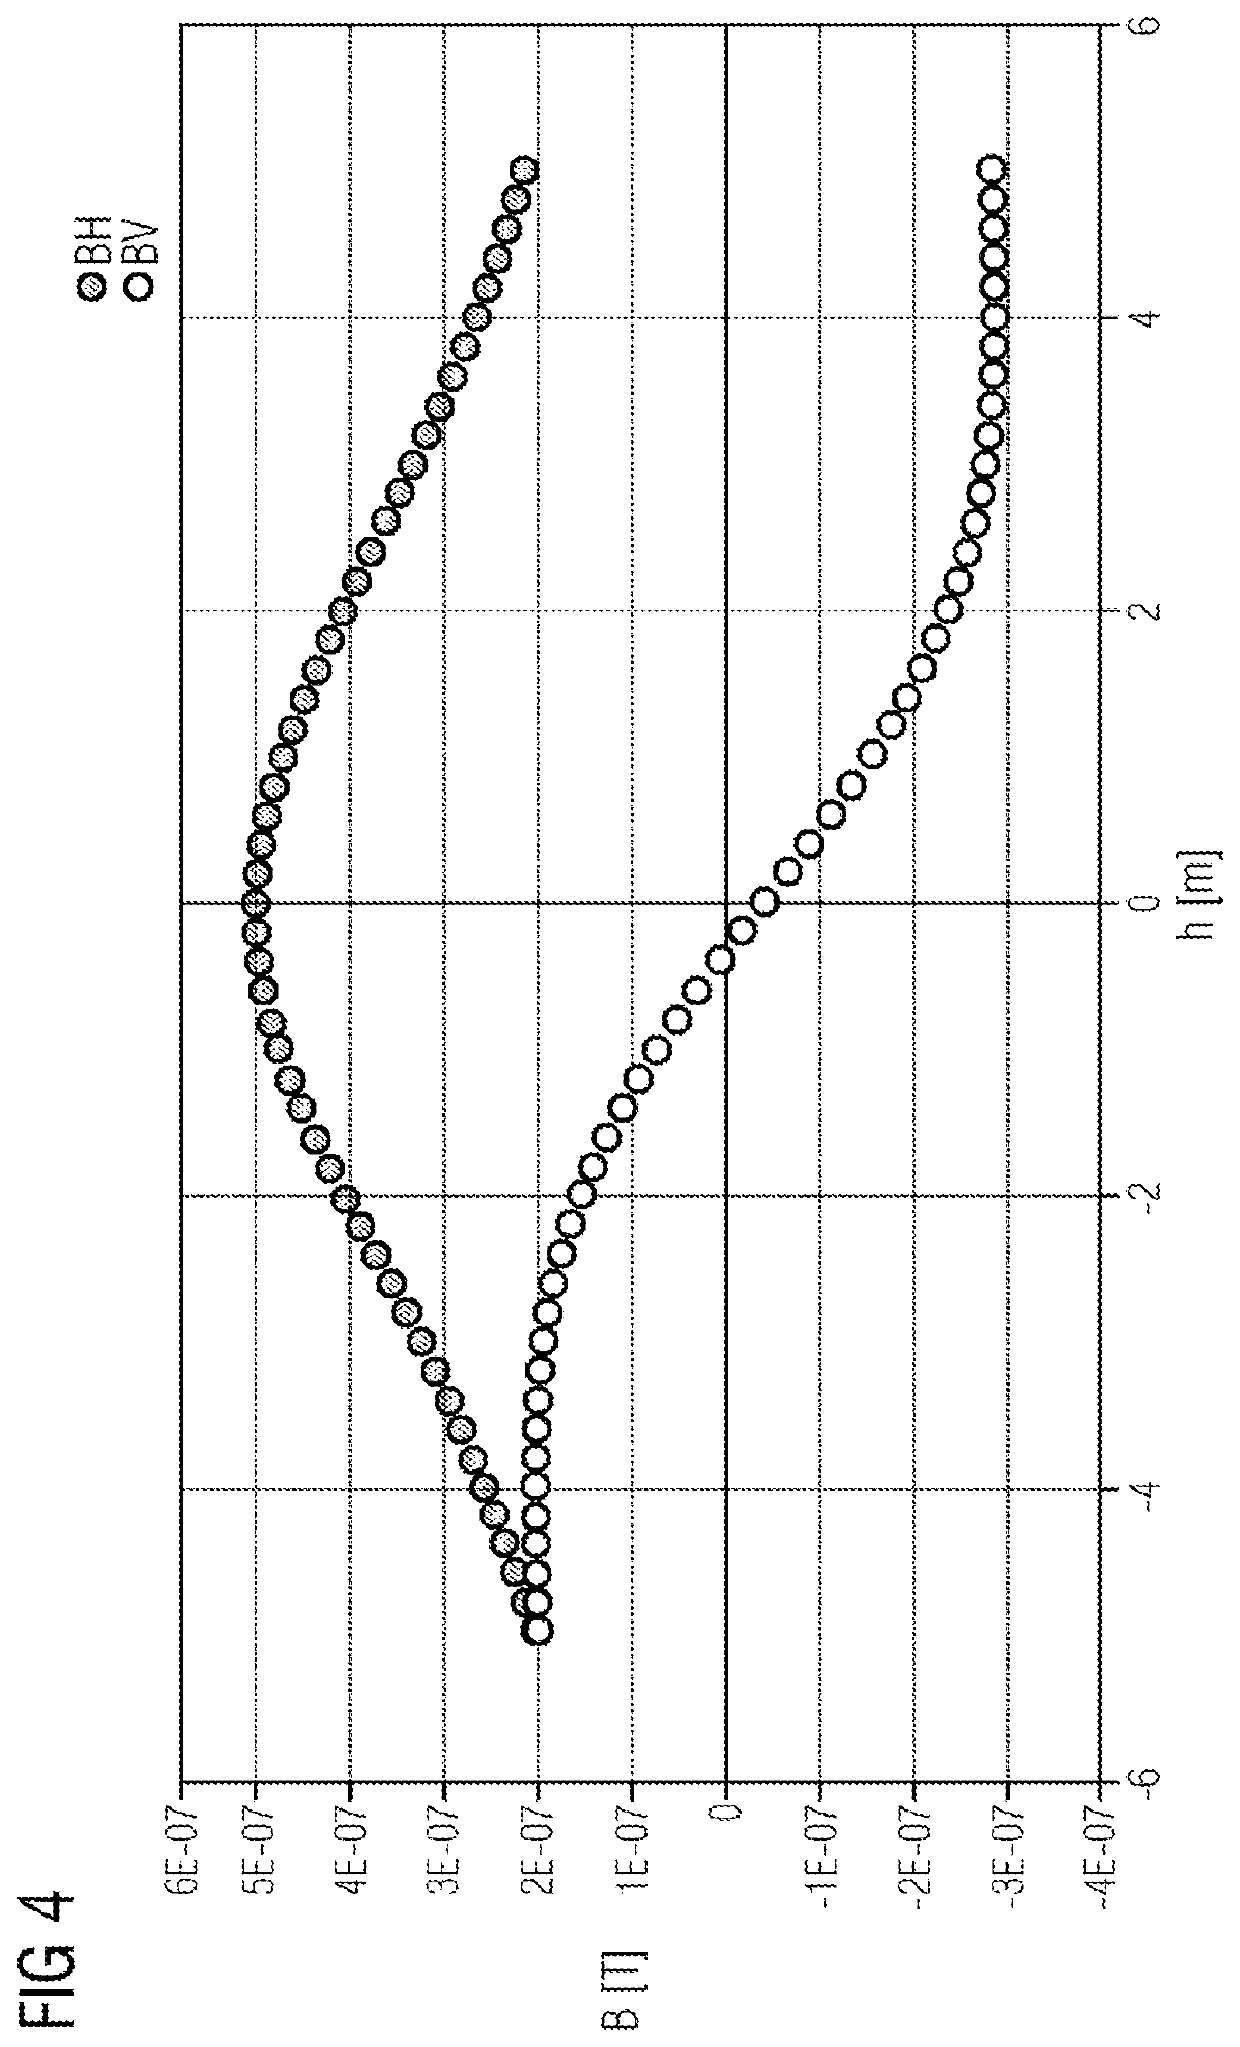 Determination of the average distance between a measurement device and a conductor